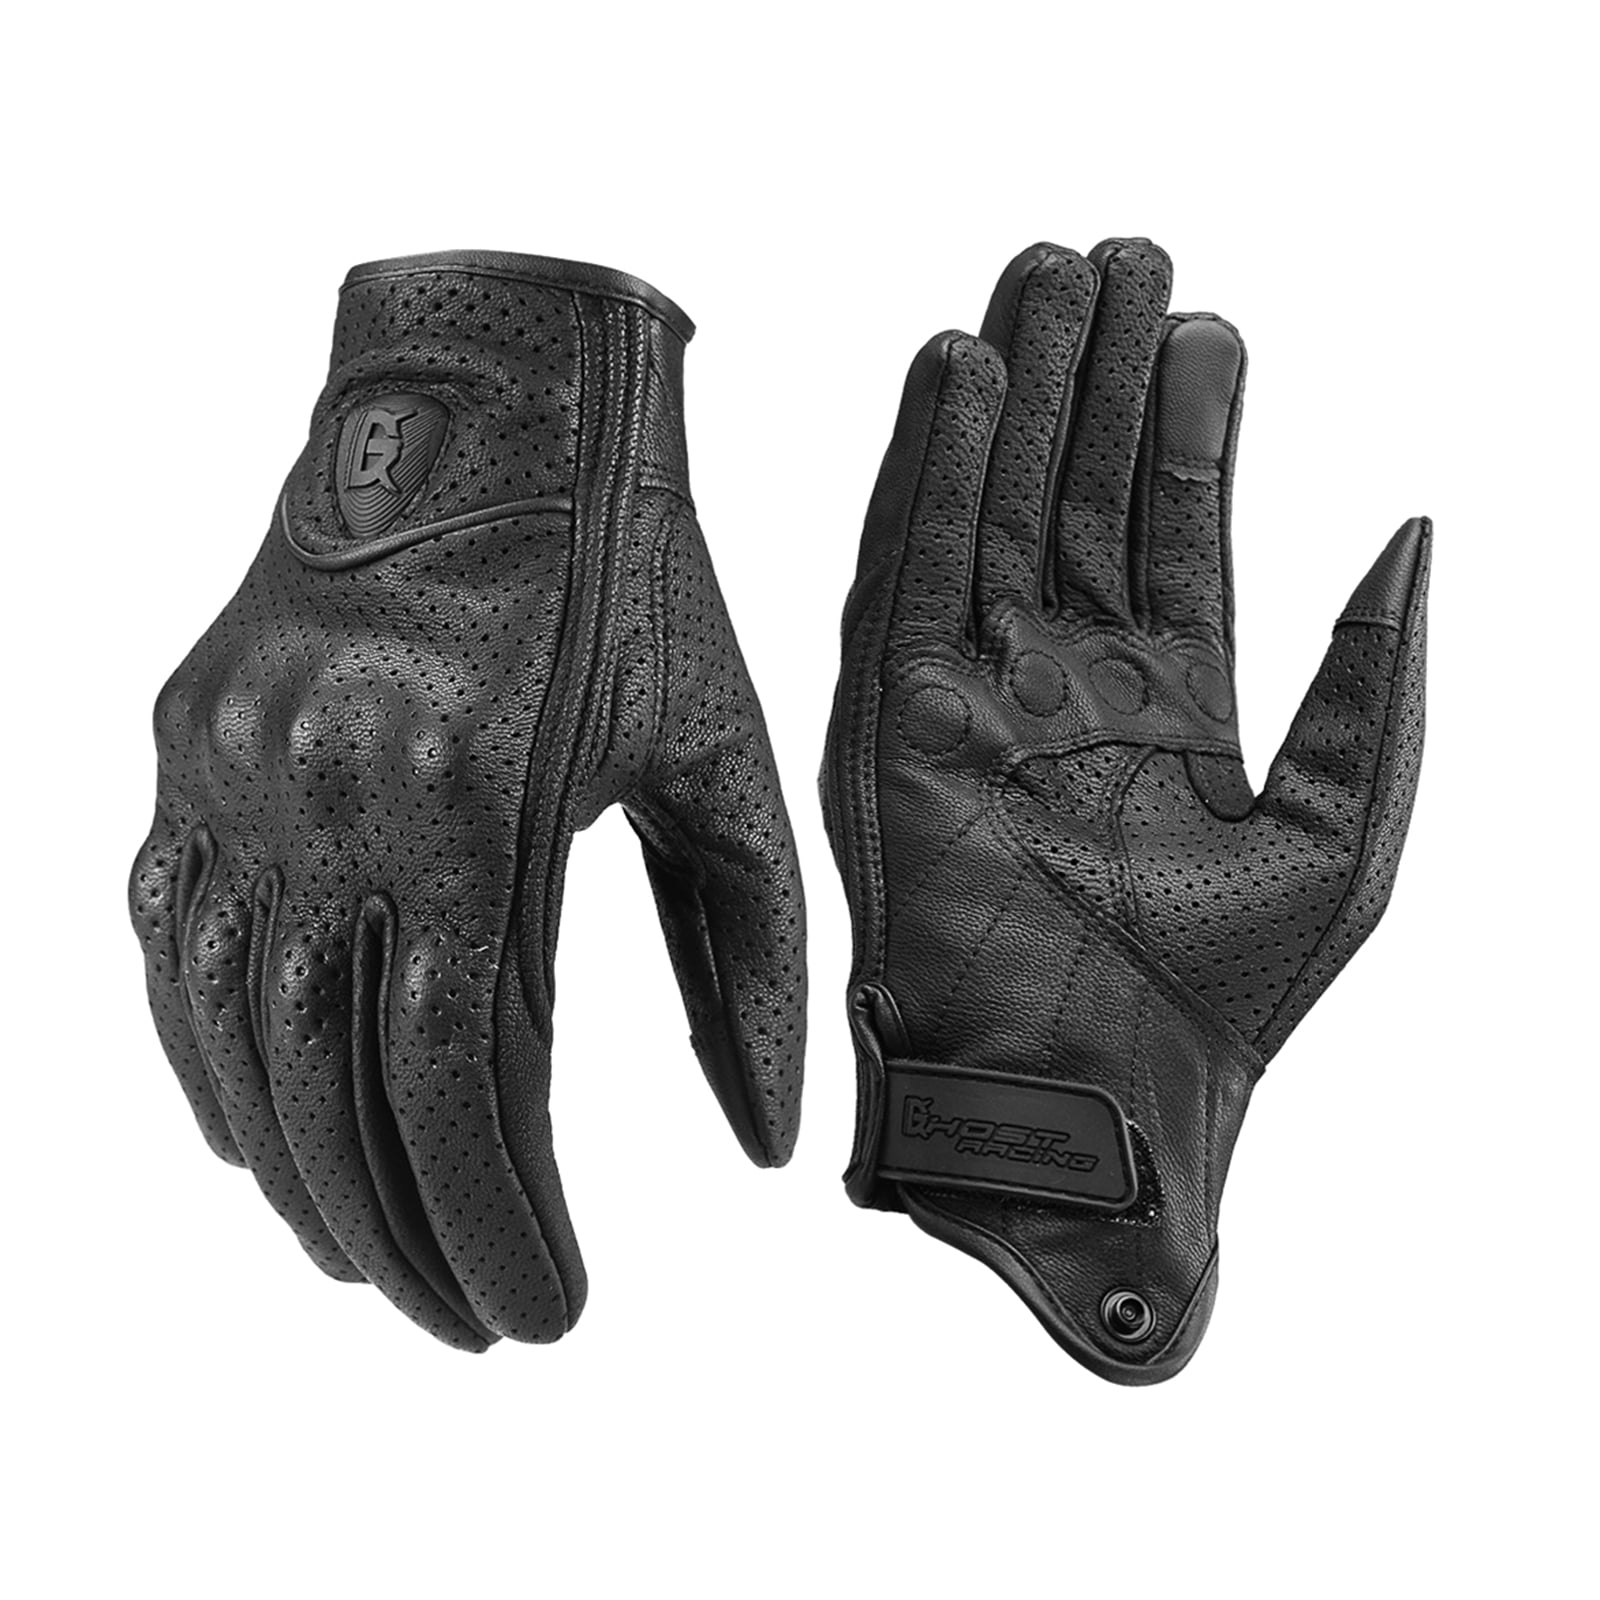 NNAB Leather Motorcycle Gloves ，Breathable Motorcycle Gloves for Men Women Which is a Touchscreen Anti-Slip Motorcycle Gloves & Racing Motorbike Gloves with Wall Hook